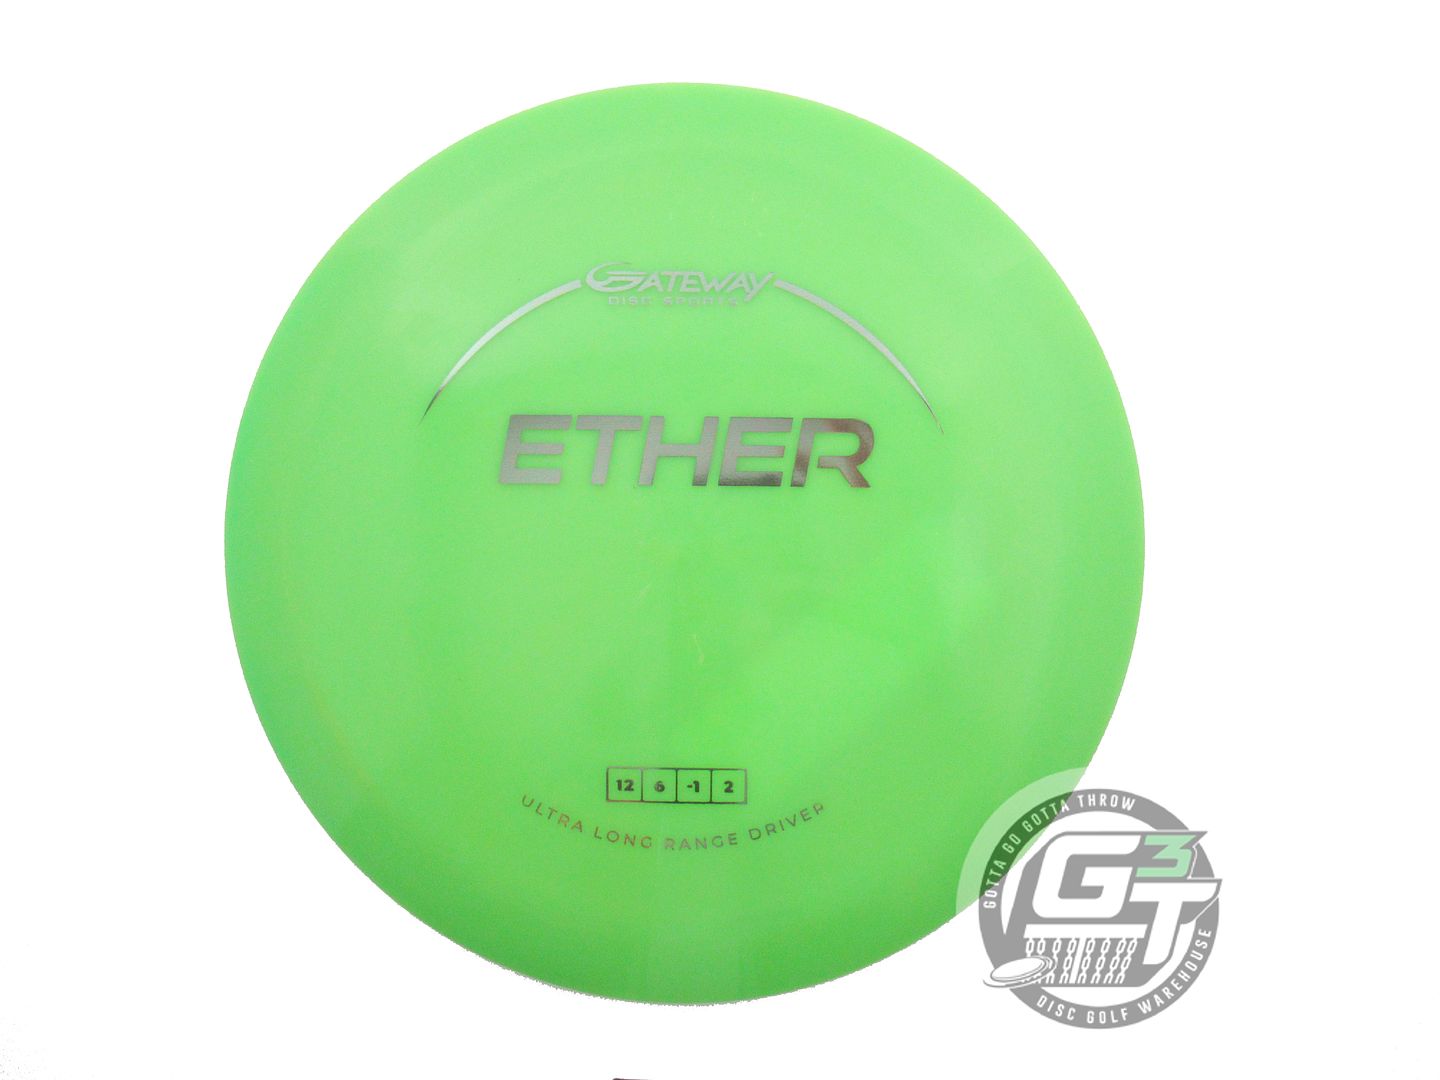 Gateway NXT Ether Distance Driver Golf Disc (Individually Listed)